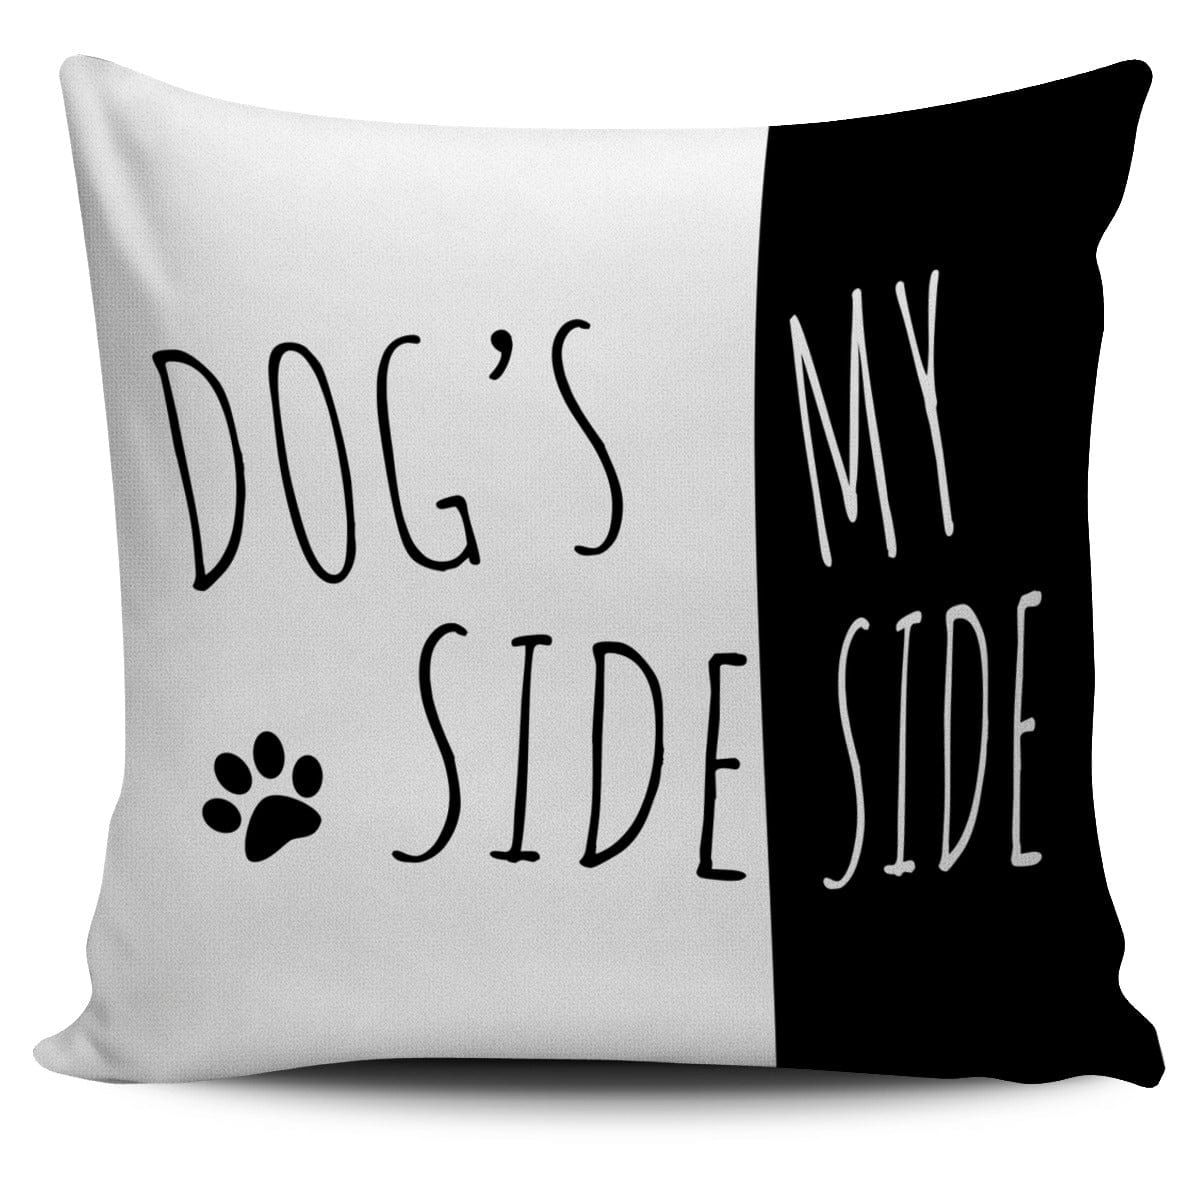 Pillow Cover - Dog's Side My Side - GiddyGoatStore